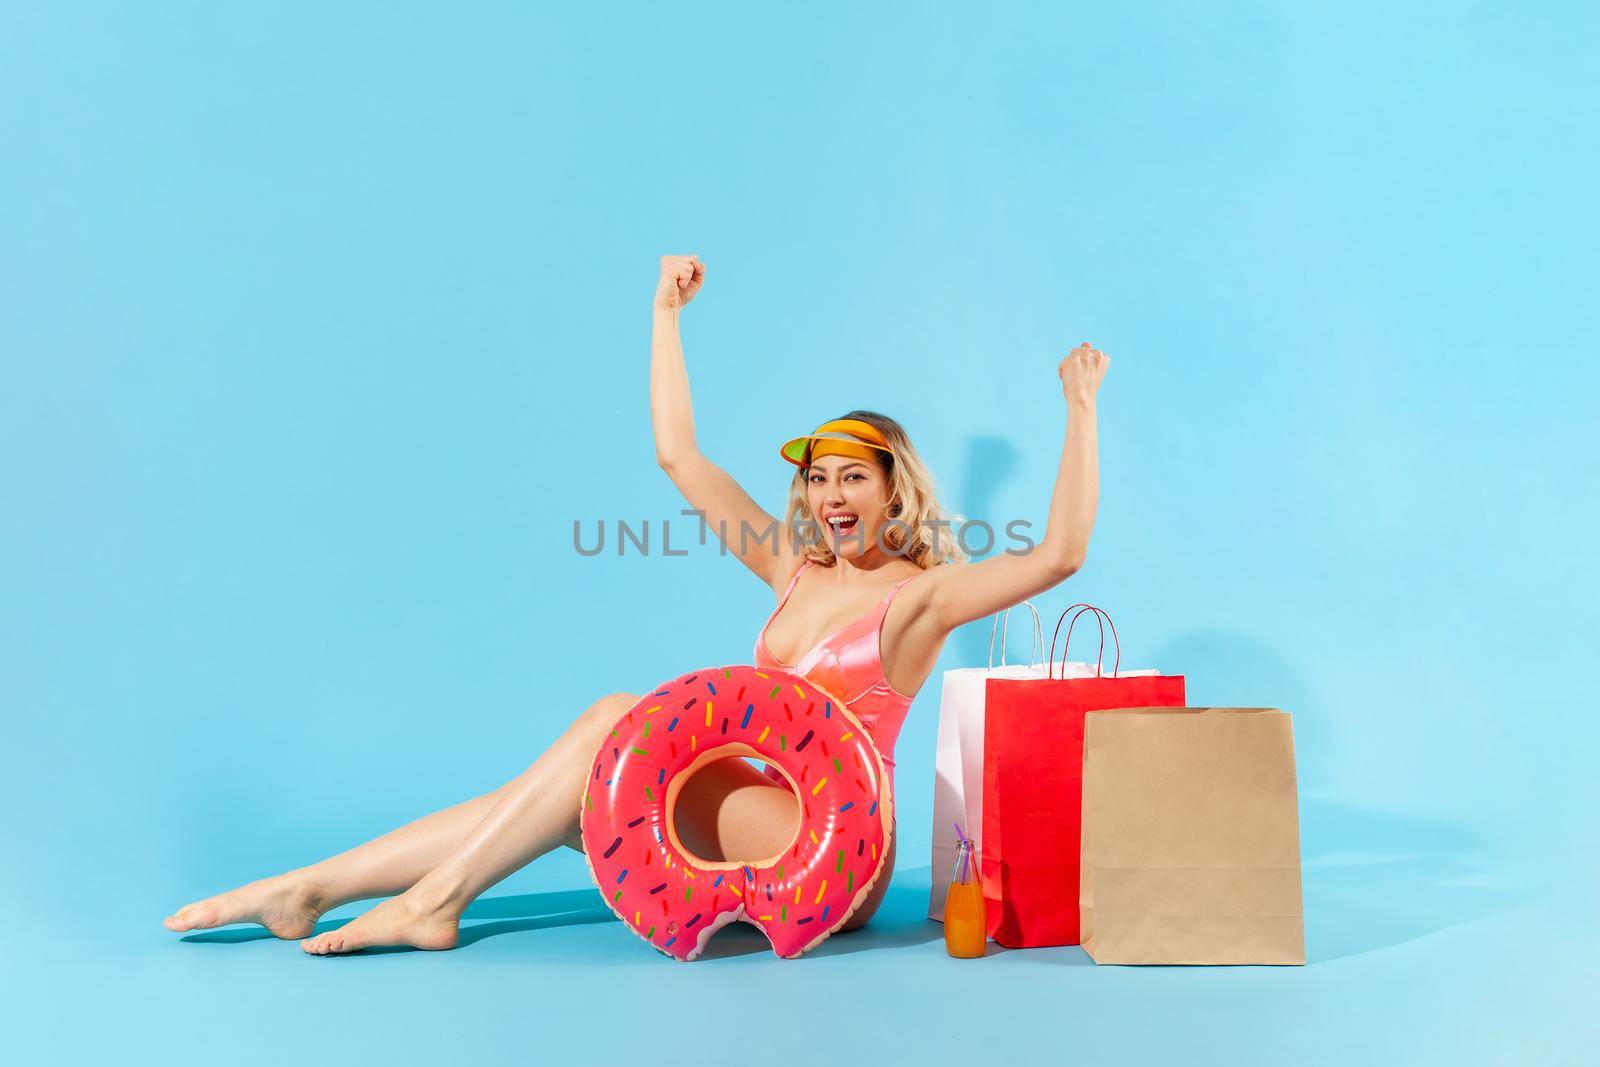 Portrait of enthusiastic overjoyed girl in swimsuit sitting with rubber ring and shopping bags, screaming from happiness, excited by summer sales. indoor studio shot isolated on blue background